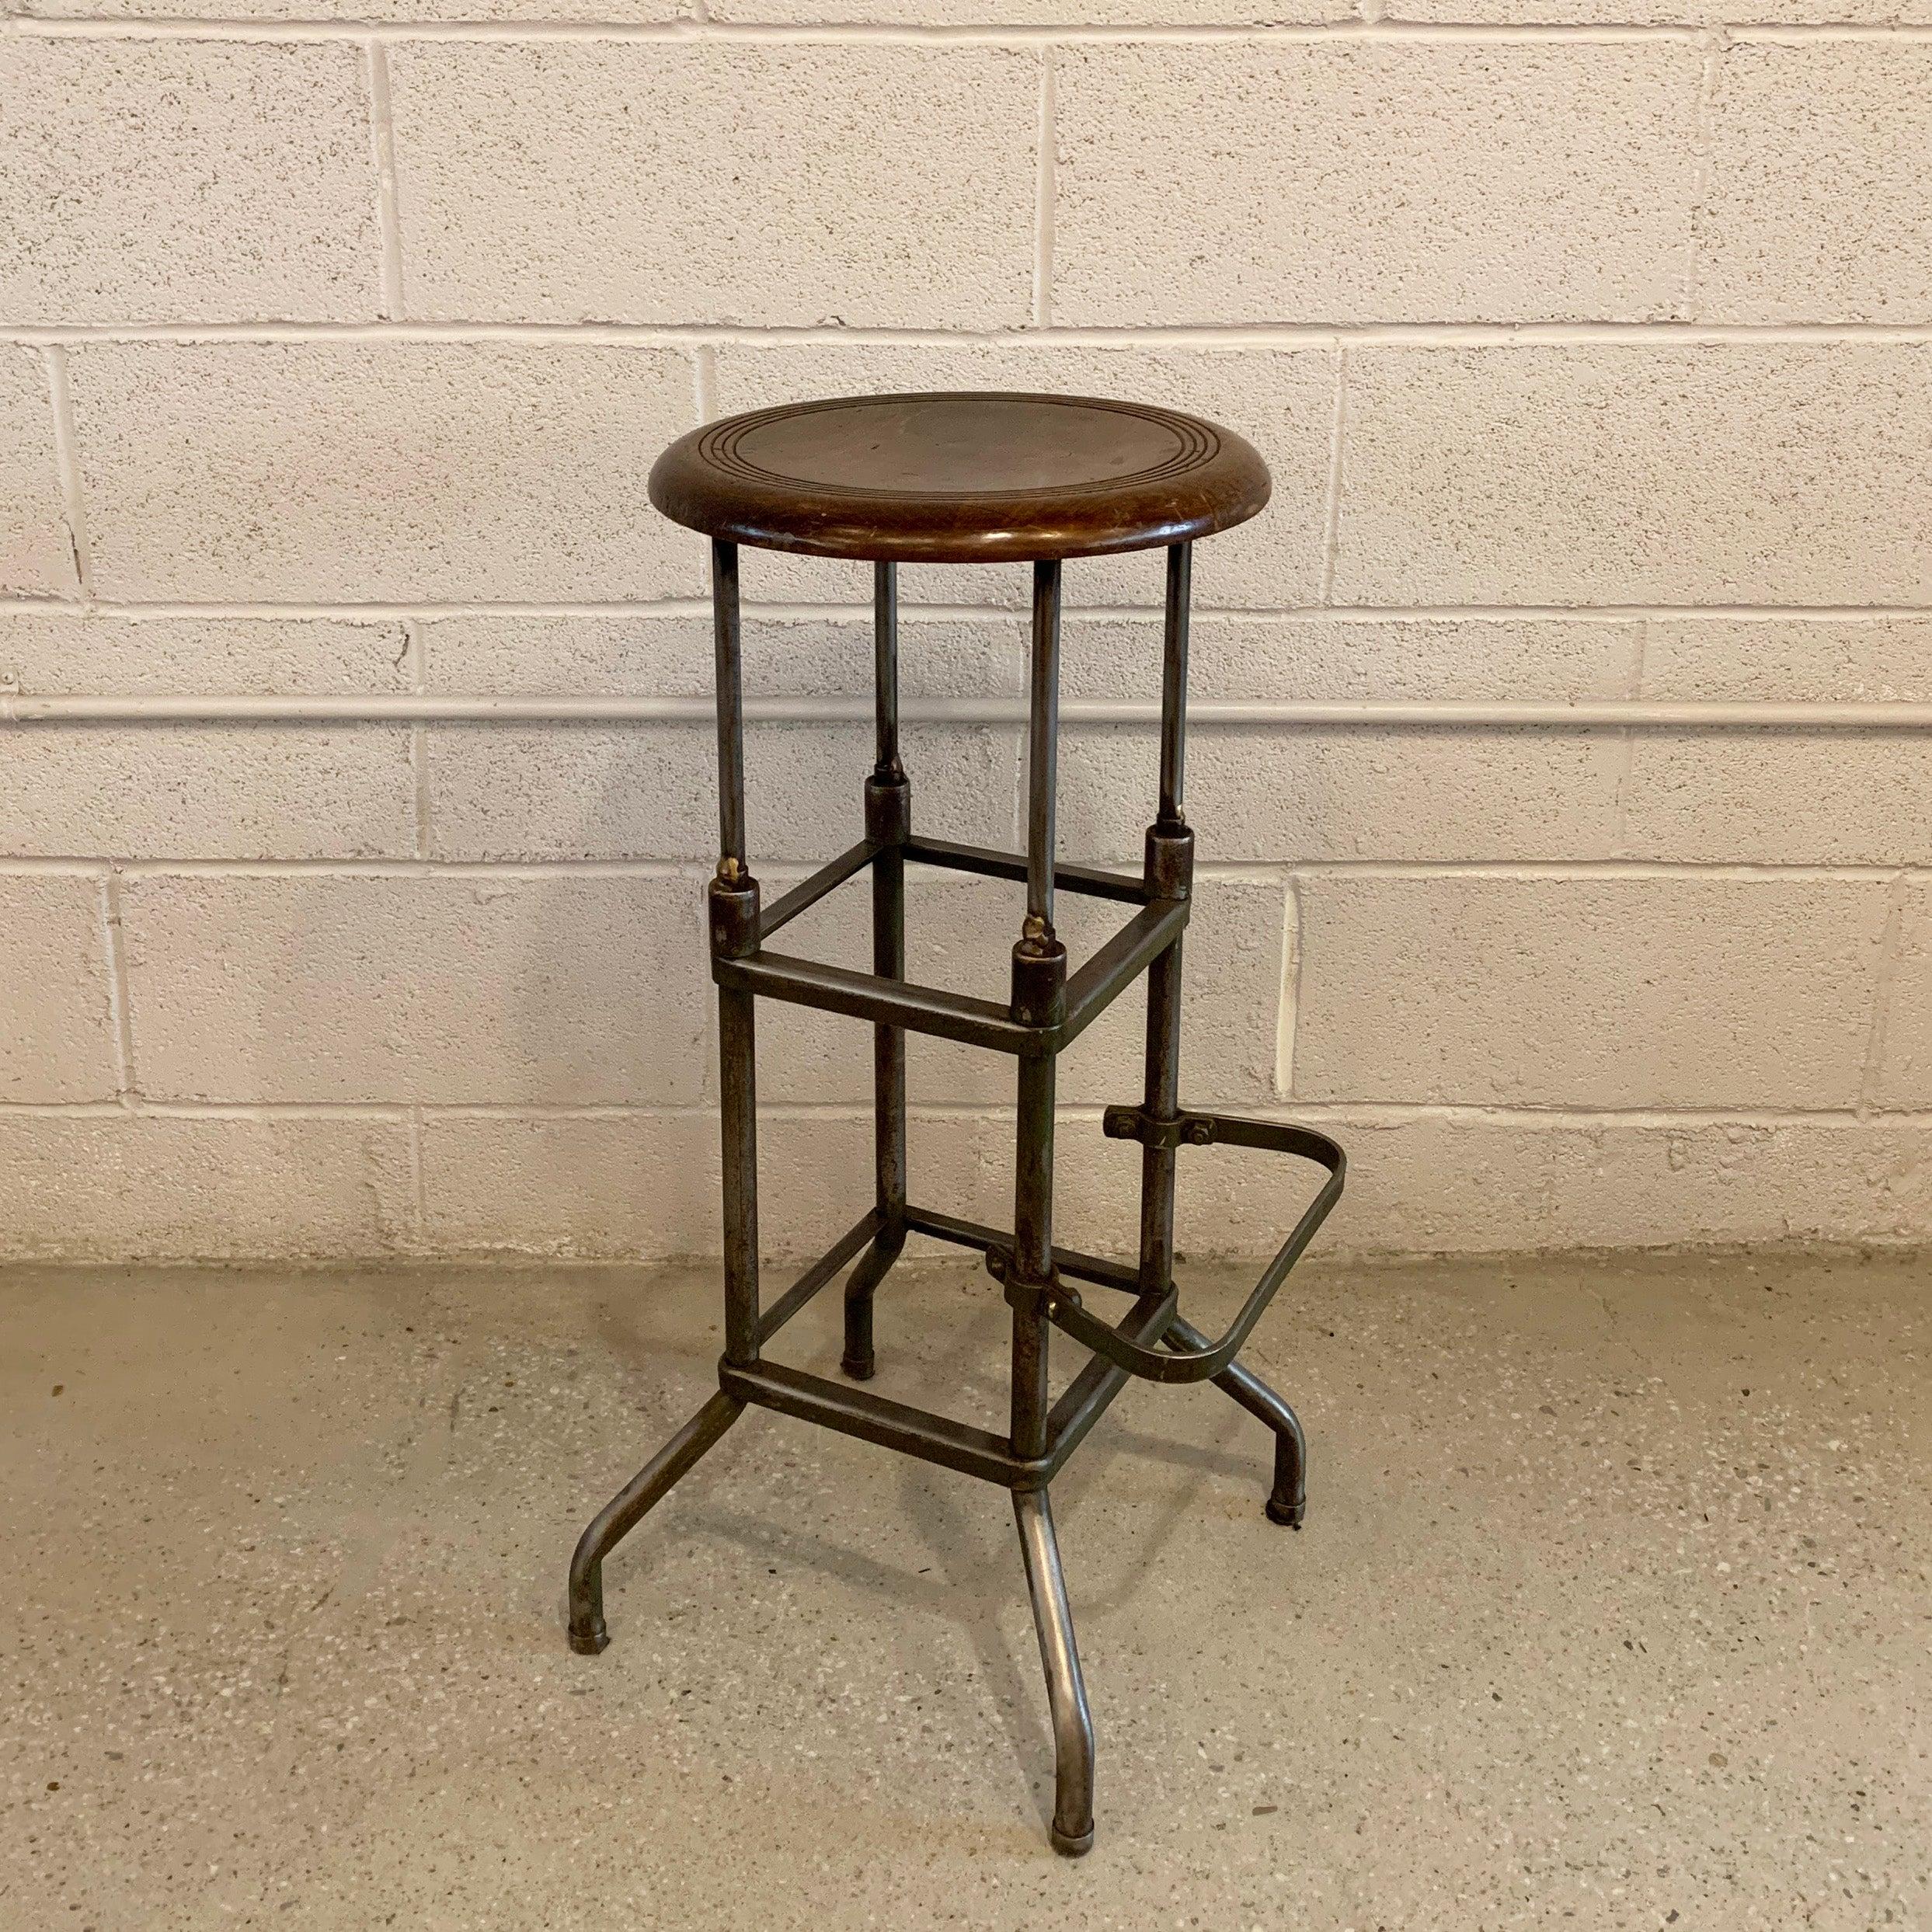 Industrial, early 20th century, drafting stool features a brushed steel base with footrest and a 14 inch diameter, round maple seat.